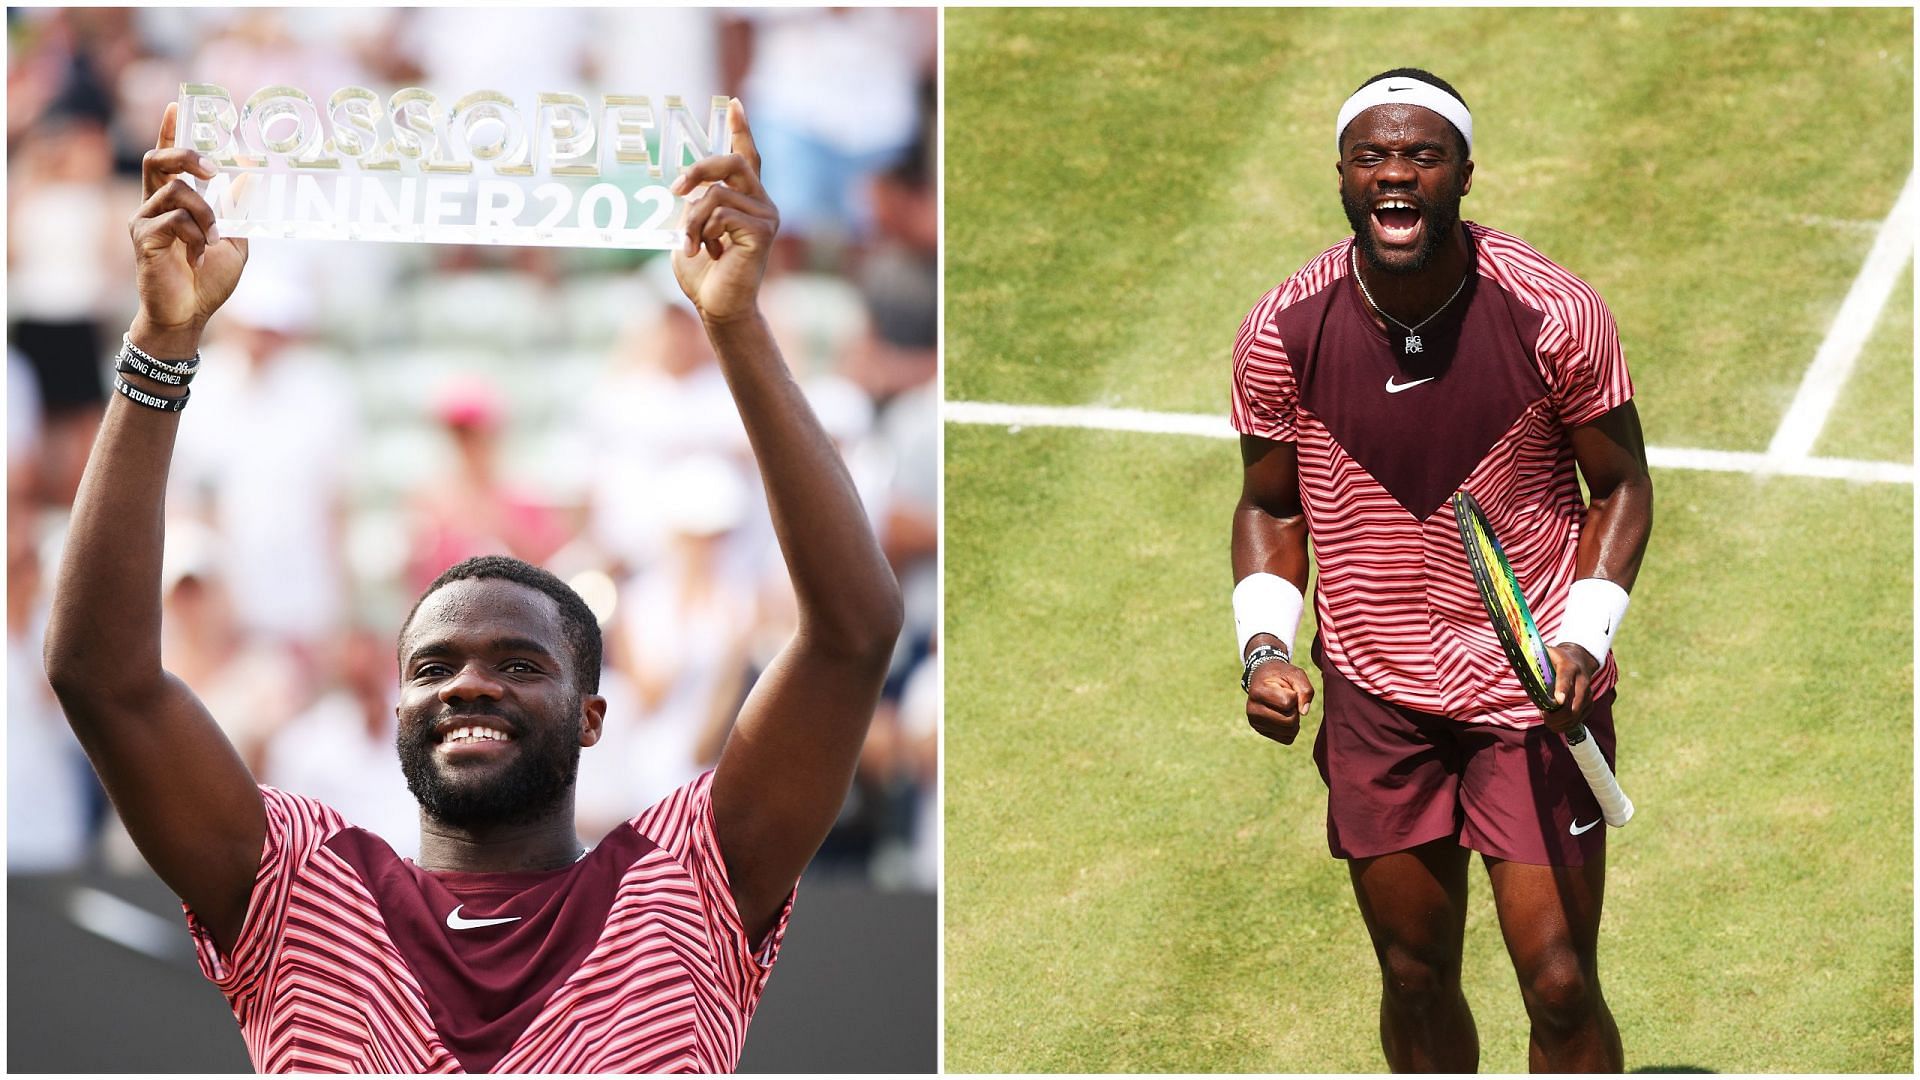 Frances Tiafoe won his third tour-level title at the BOSS OPEN in Sttutgart.